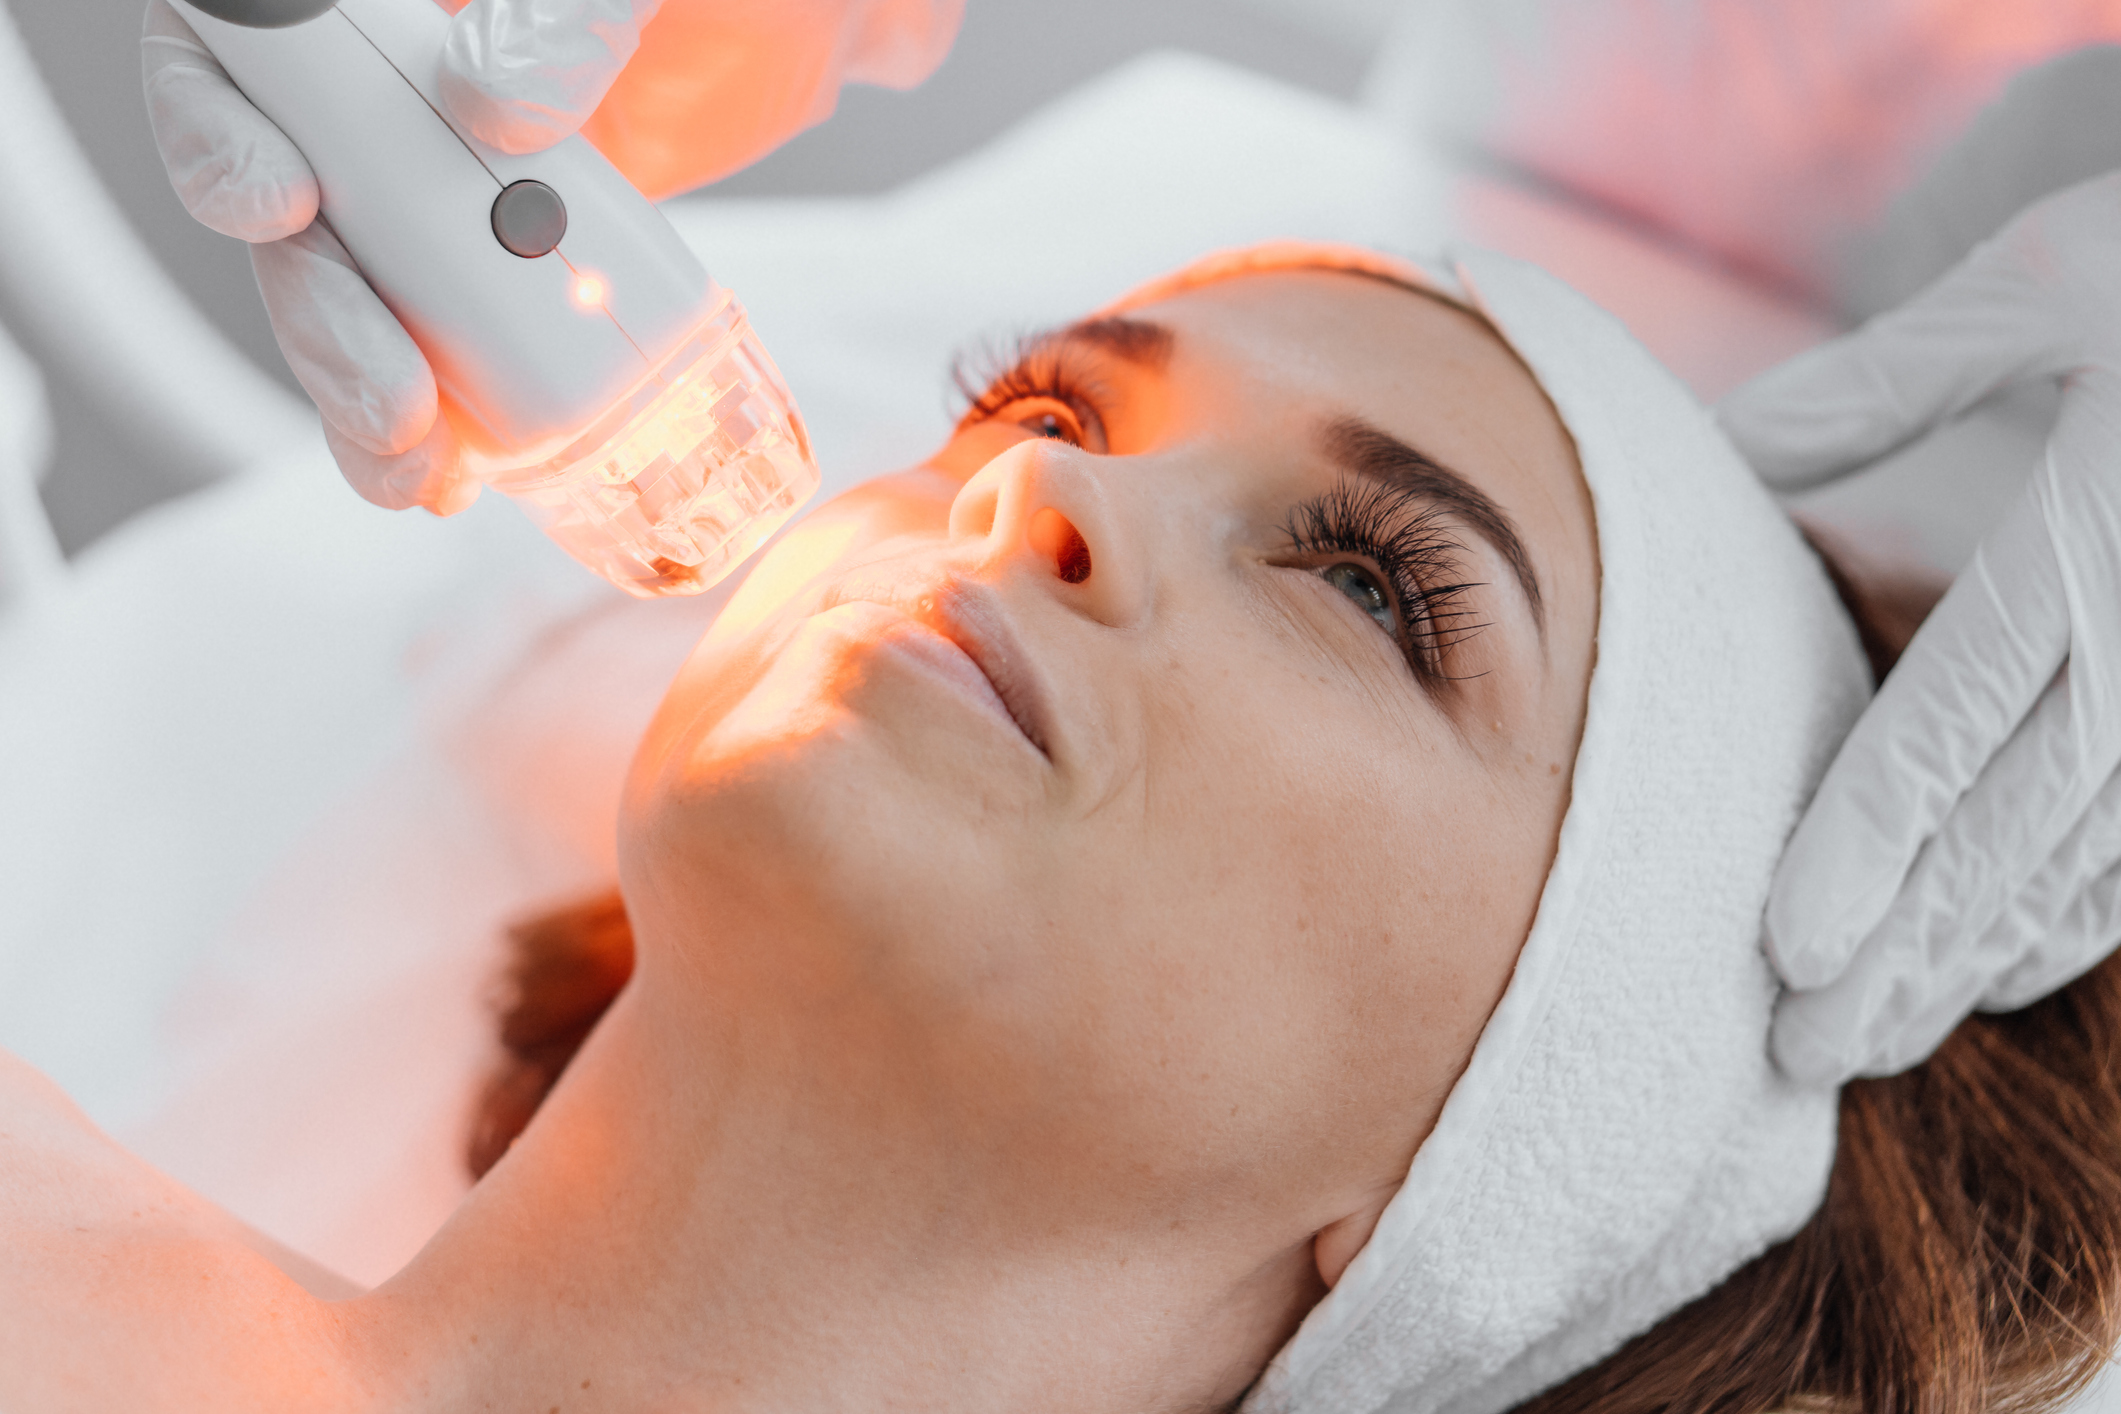 Photo from the studio of cosmetology, demonstrating the process of led therapy and facial skin care. A woman undergoes a procedure in a beauty salon. Beautician in white gloves use. High quality photo